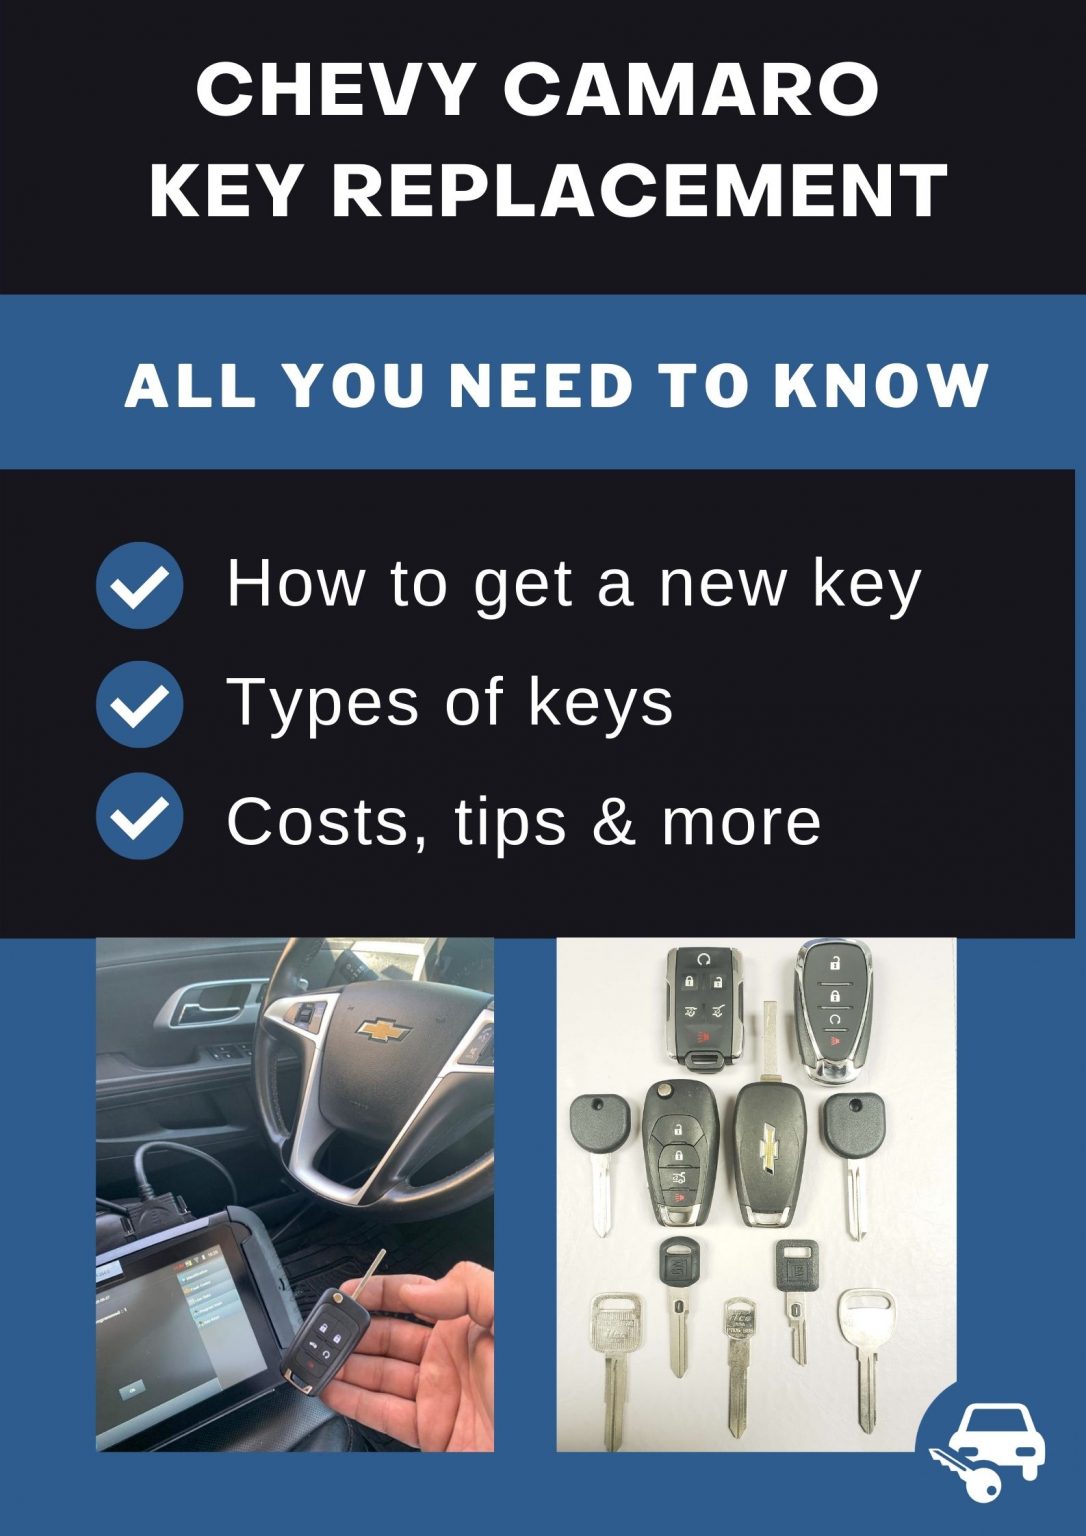 Chevrolet Camaro Key Replacement What To Do, Options, Costs & More